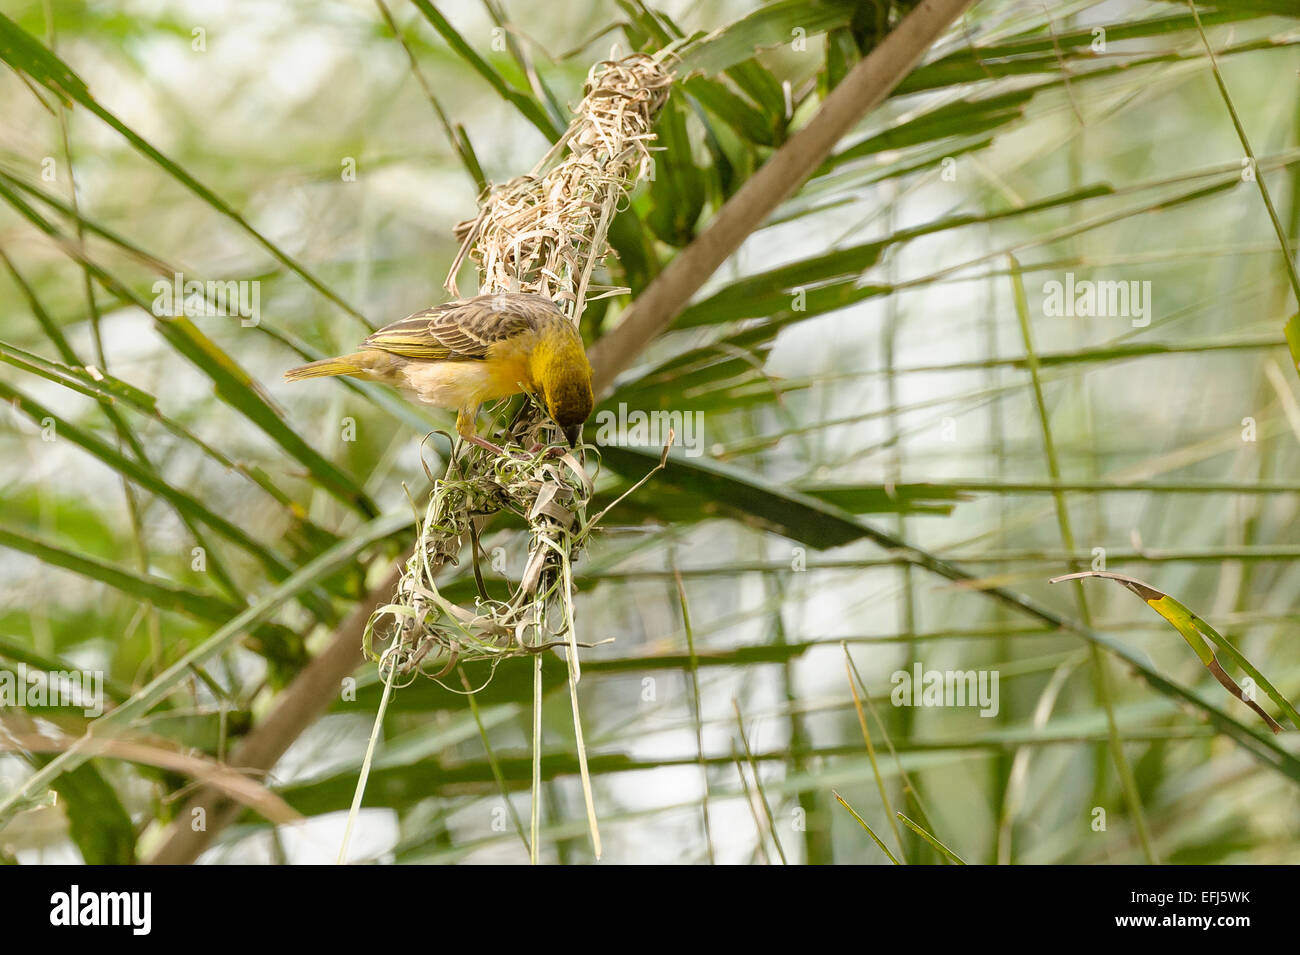 The knotted woven structure of a yellow weaver bird nest being constructed by an adult male. Bird behavior avian behaviour Stock Photo